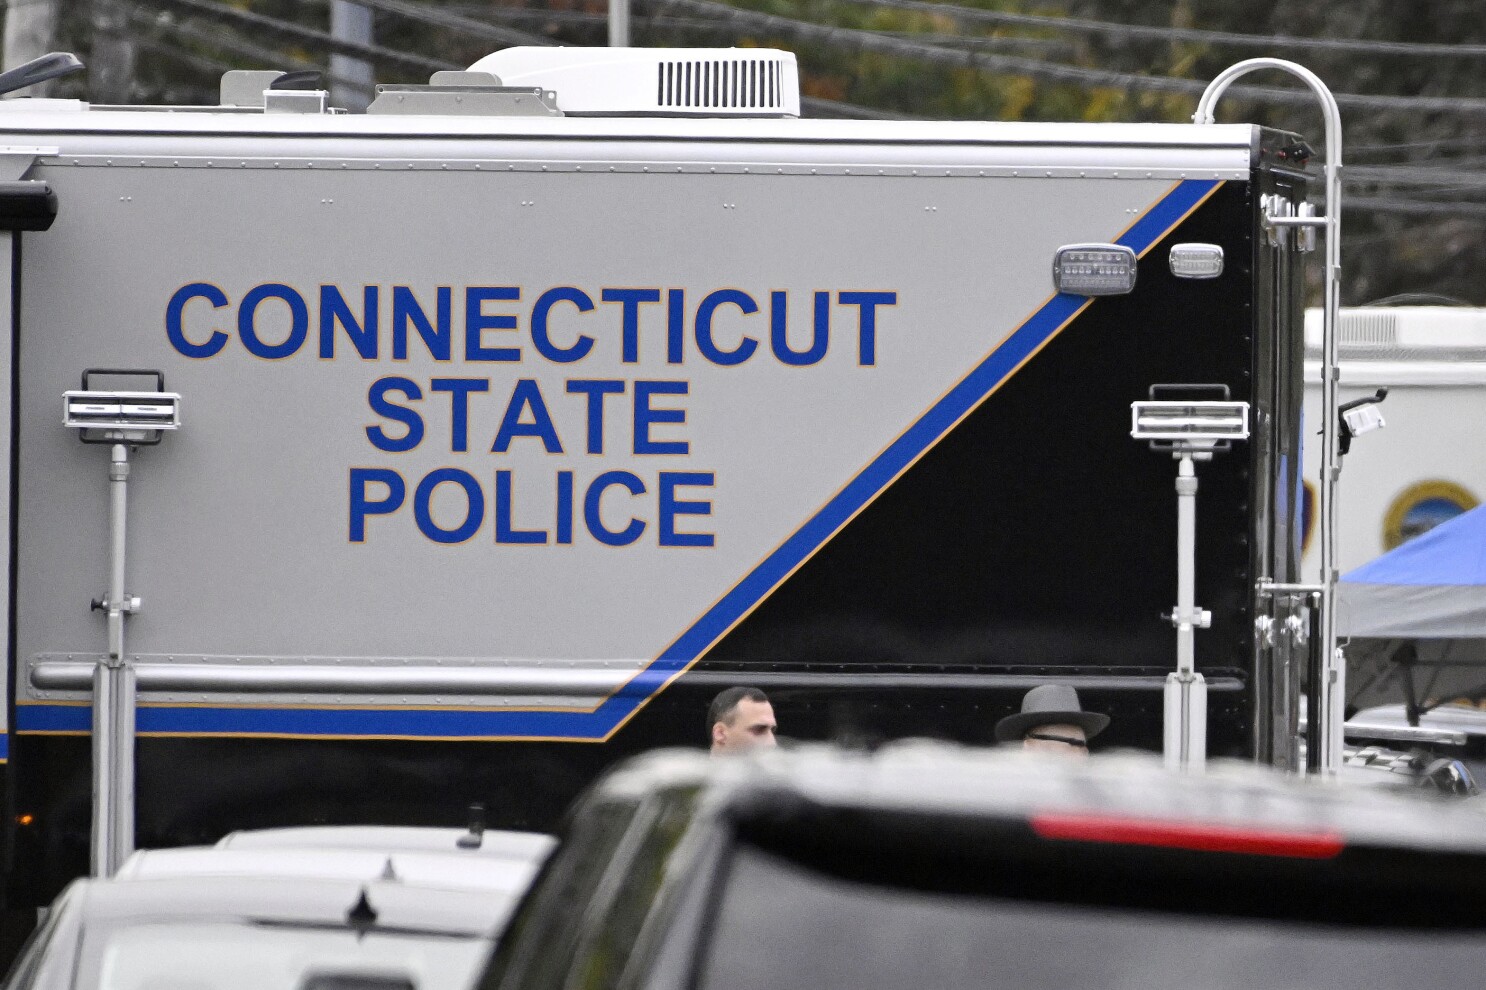 Top Connecticut state police leaders retiring as investigators